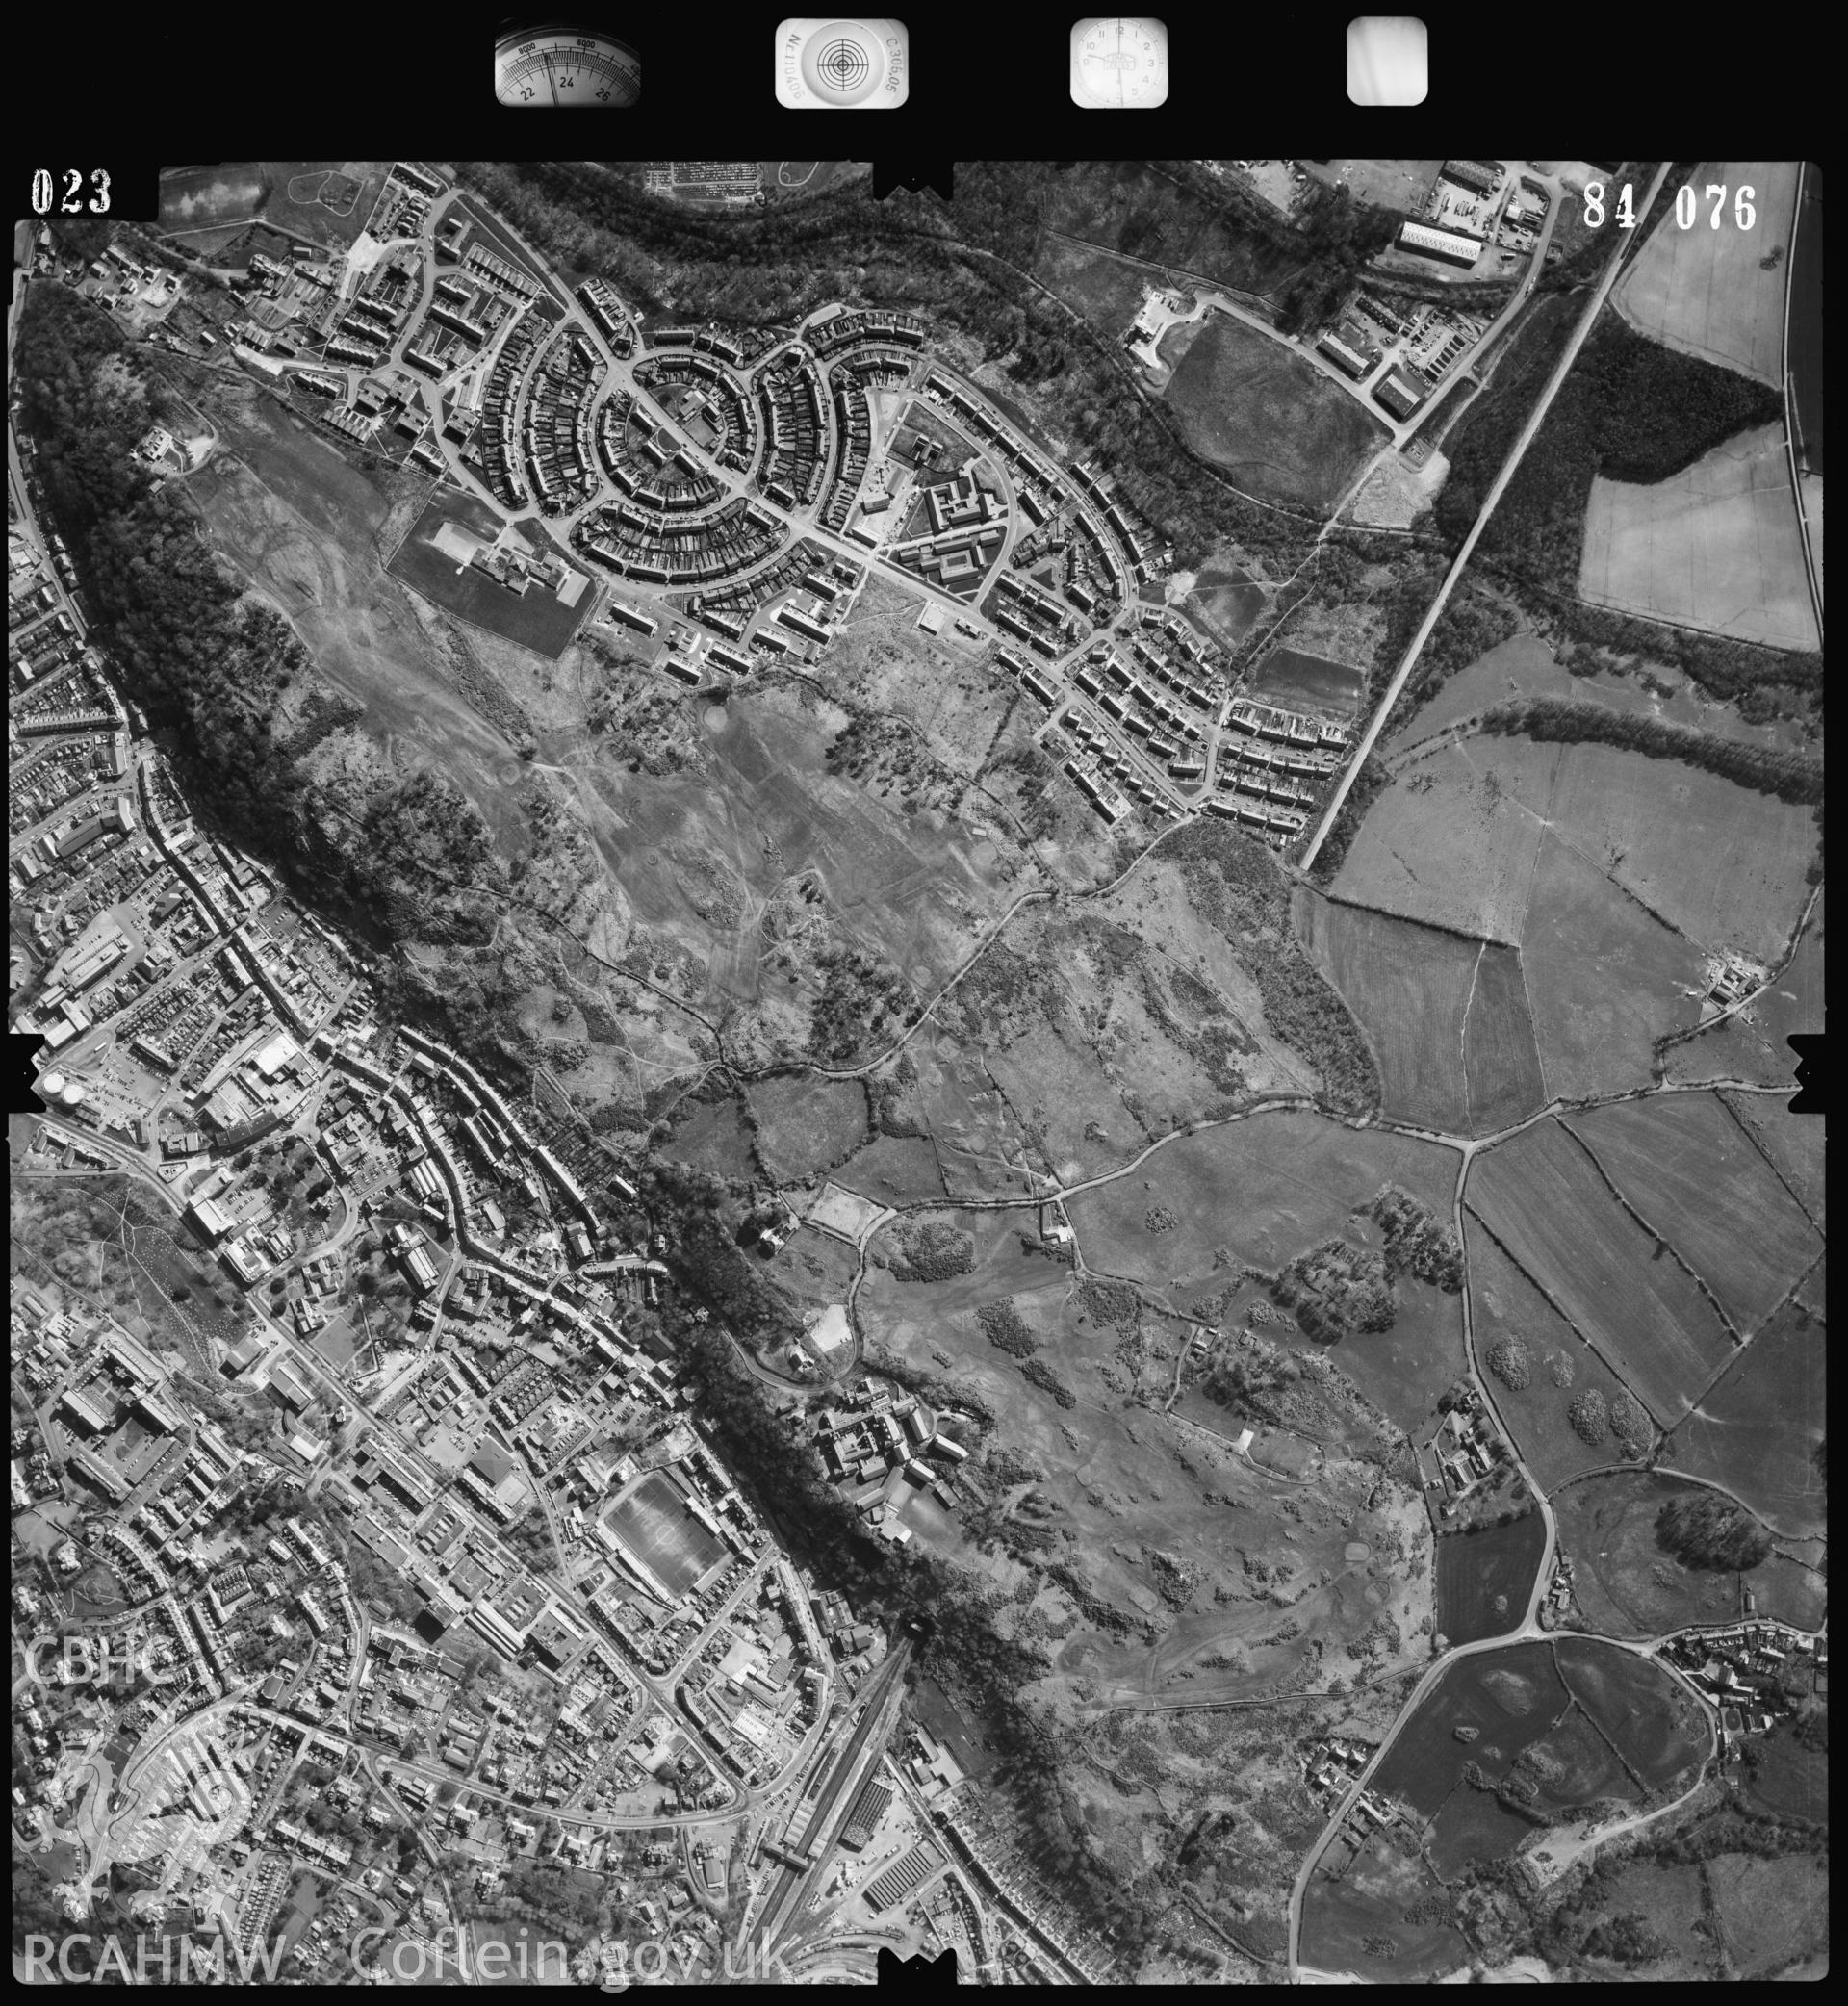 Digitized copy of an aerial photograph showing Upper Bangor area, taken by Ordnance Survey, 1984.